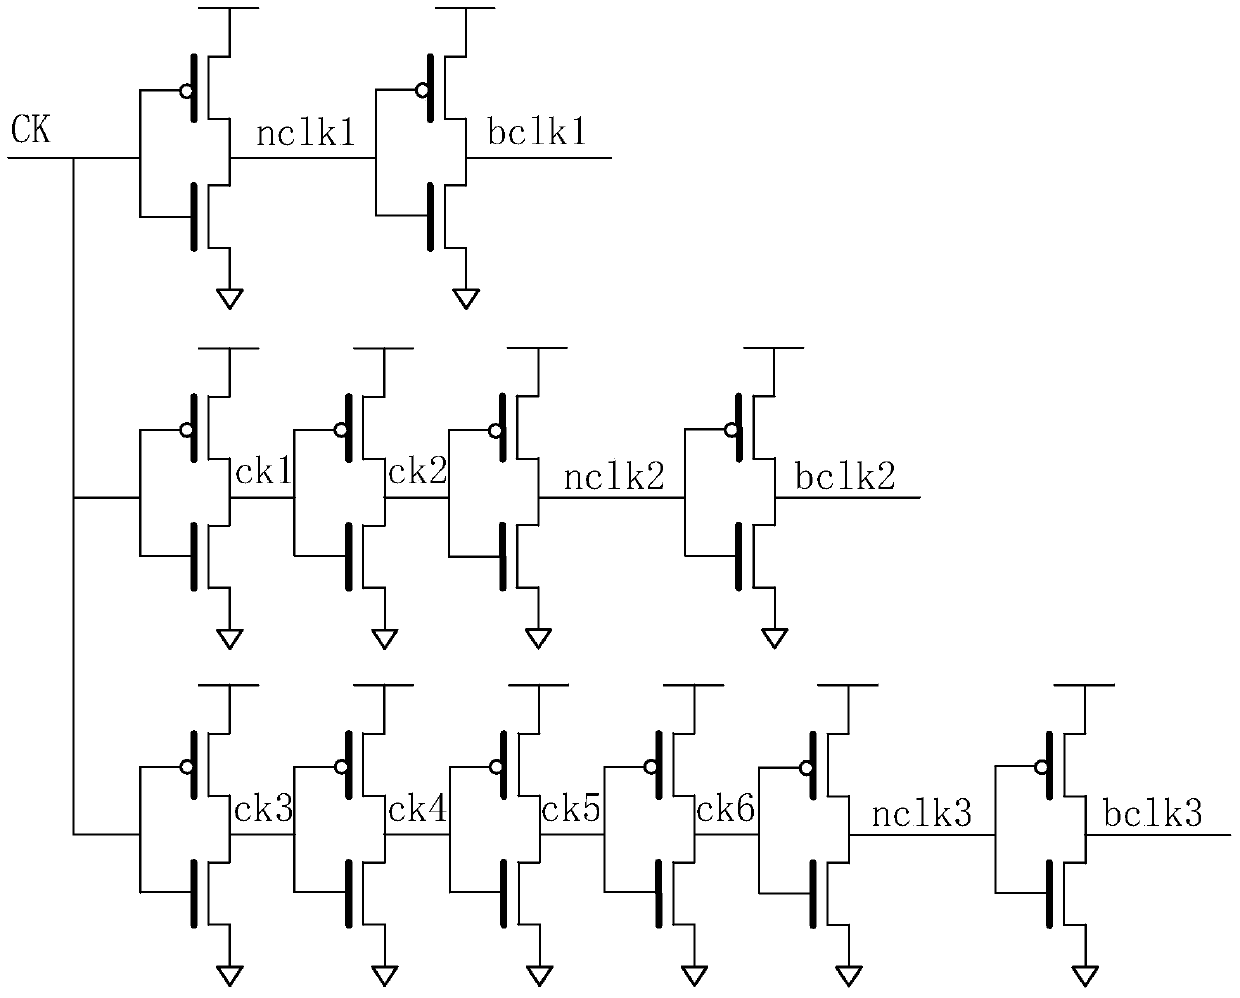 A Radiation Resistant Flip-Flop Circuit Structure Based on Single Phase Clock